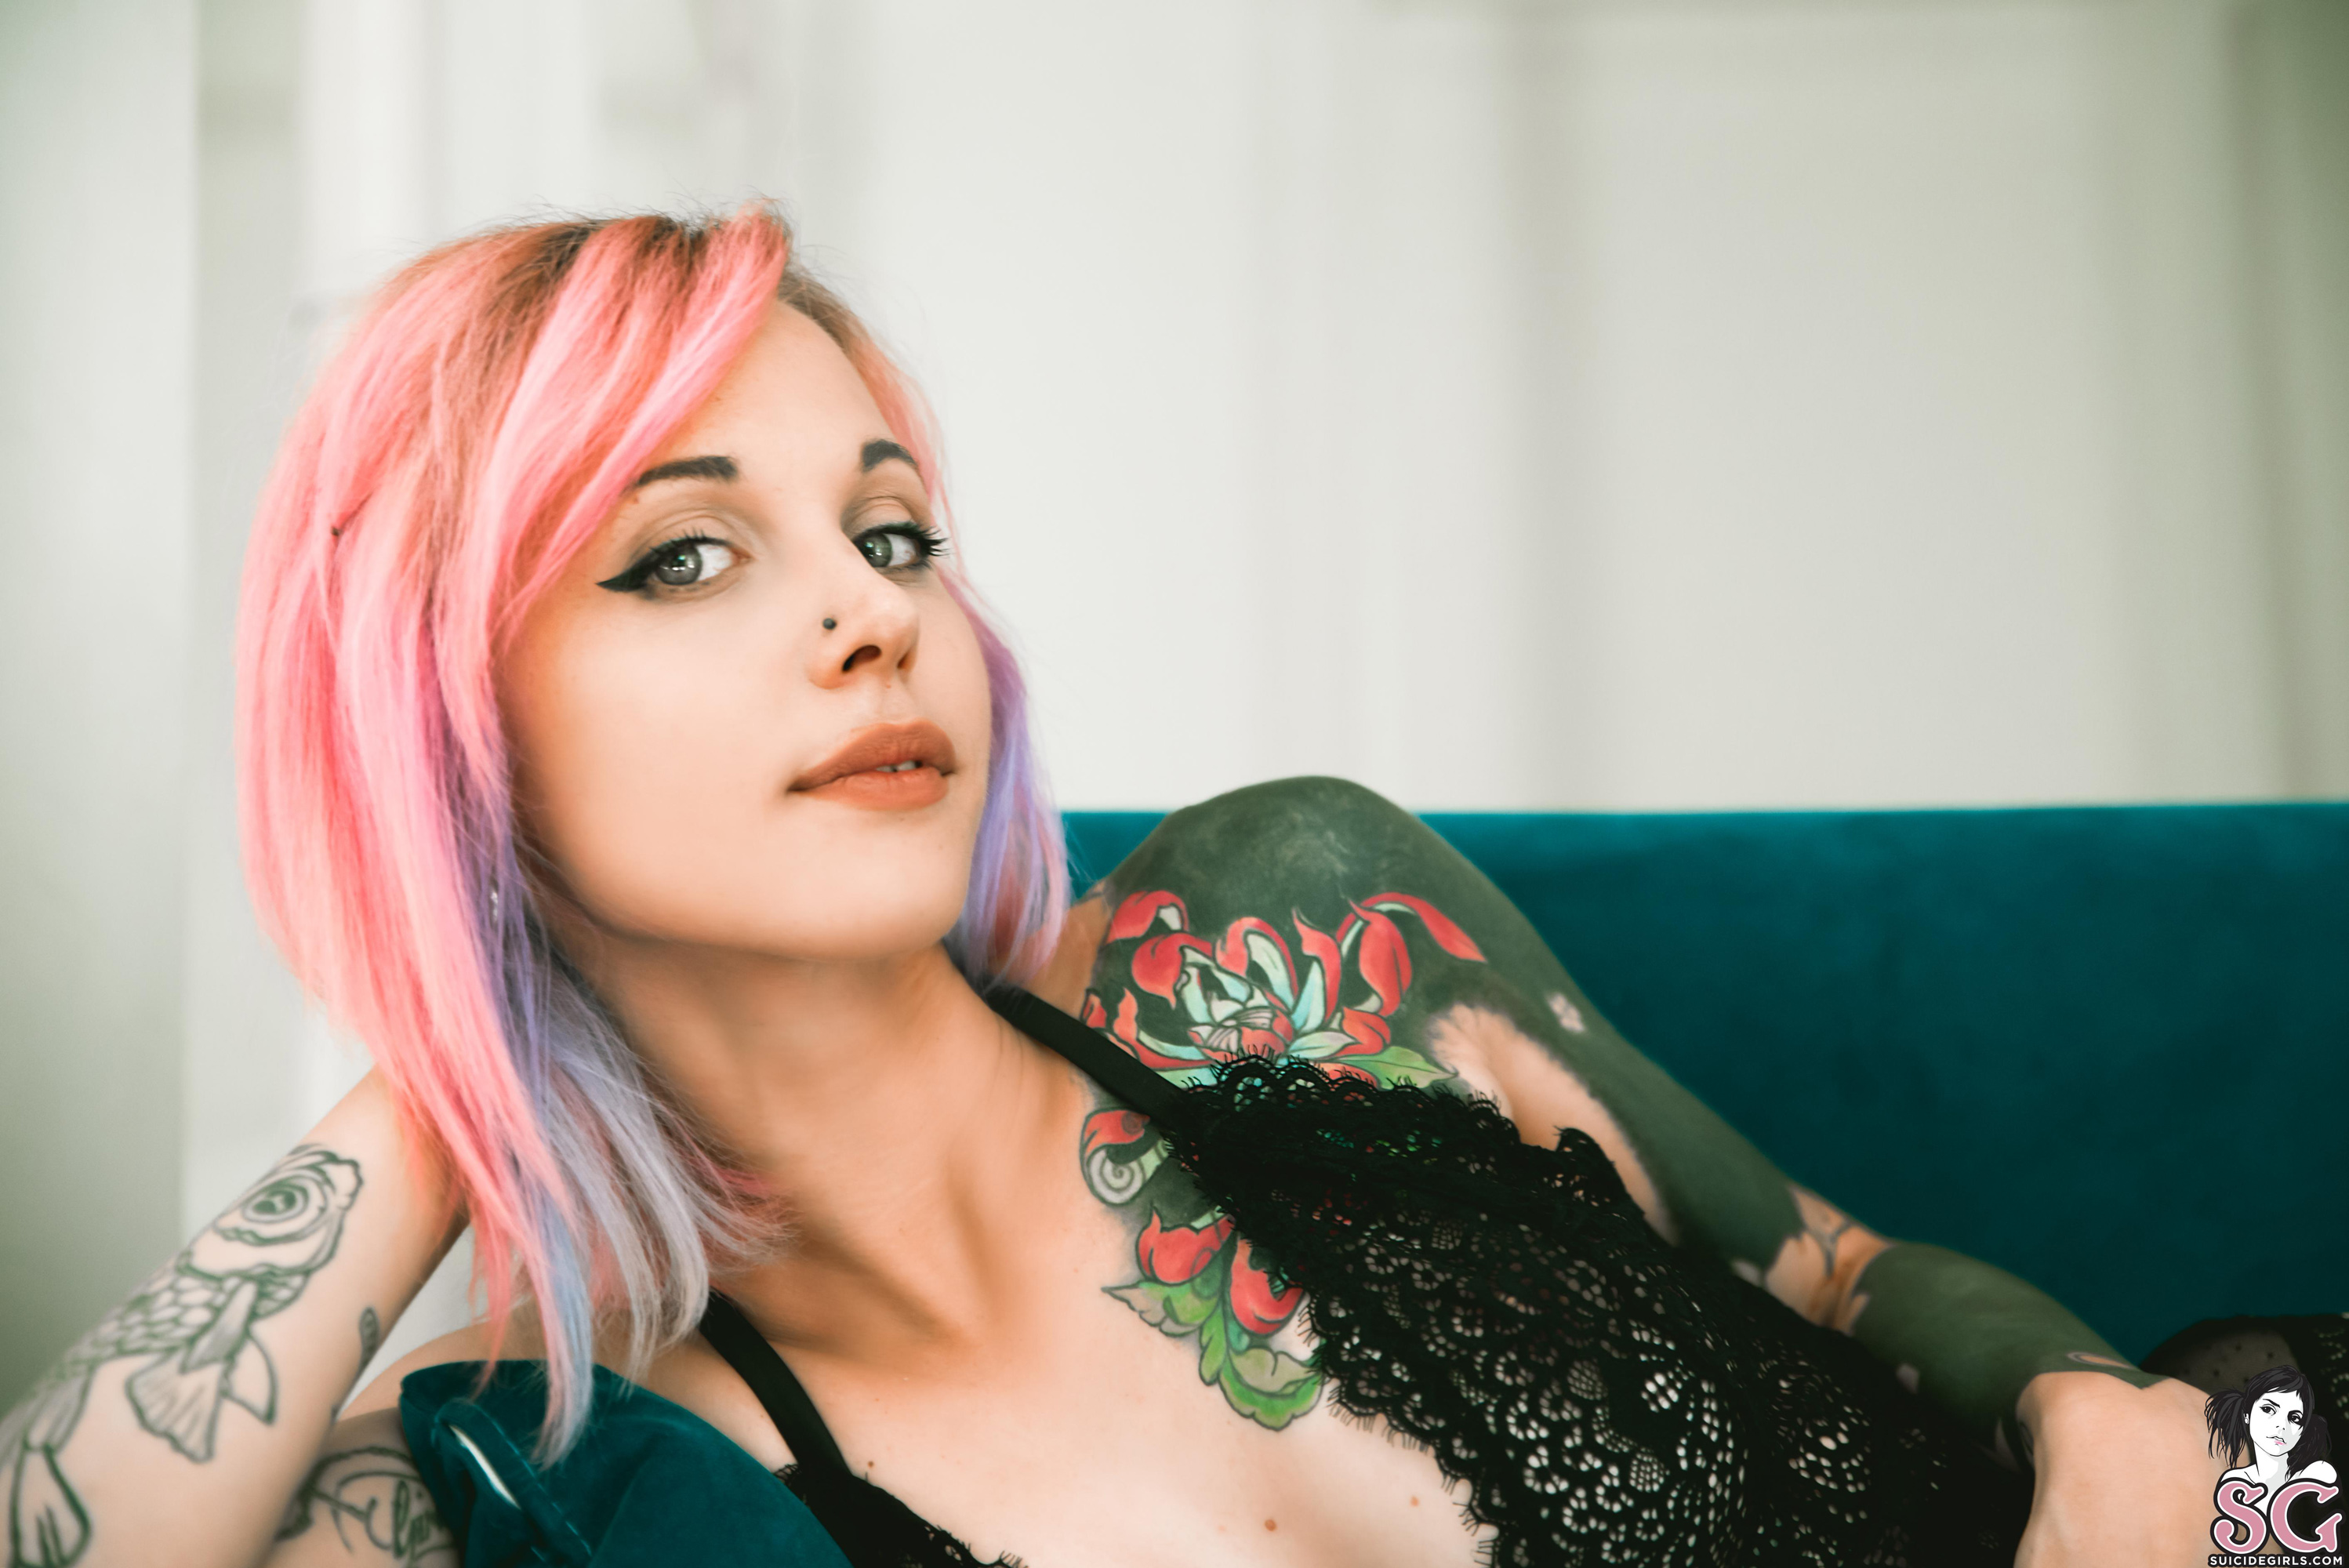 People 2996x2000 women model pink hair Suicide Girls indoors NinaQ Suicide watermarked pierced nose tattoo